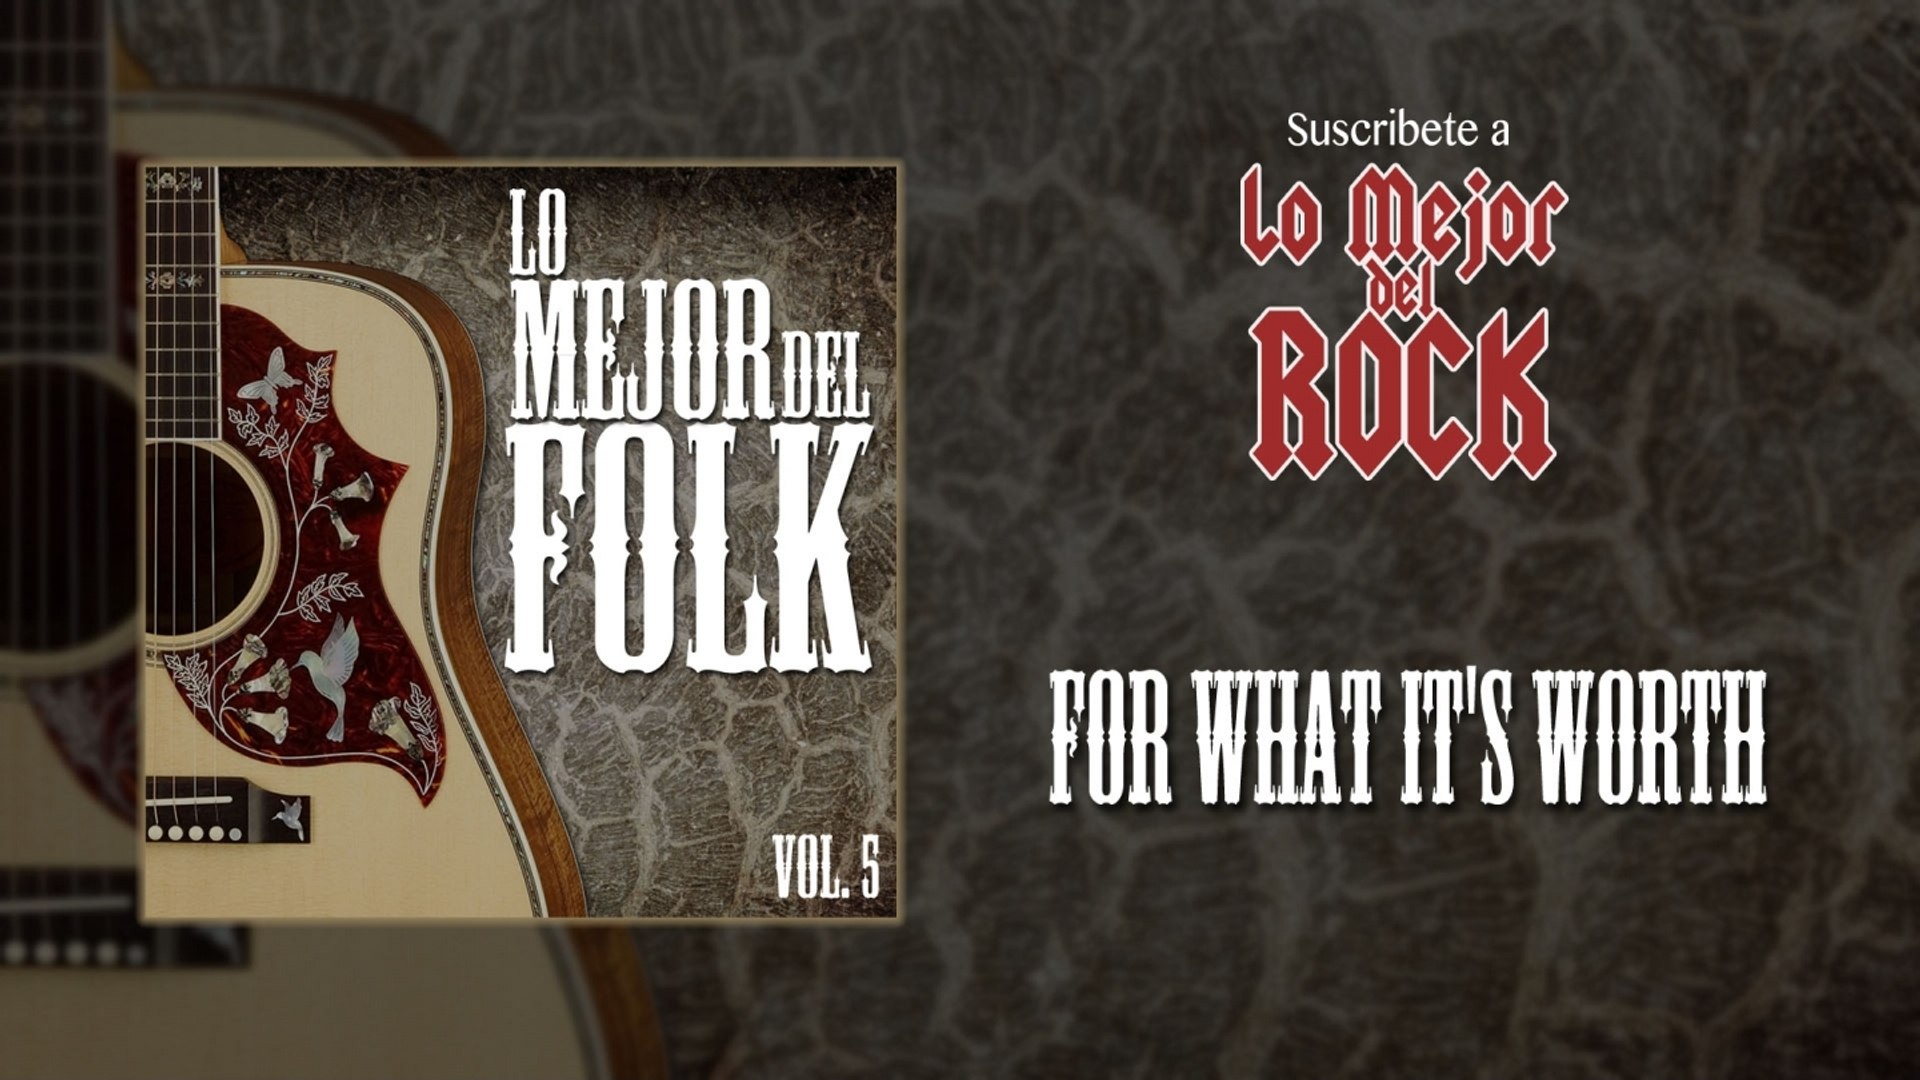 ⁣Lo Mejor del Folk - Vol. 5 - For What It's Worth